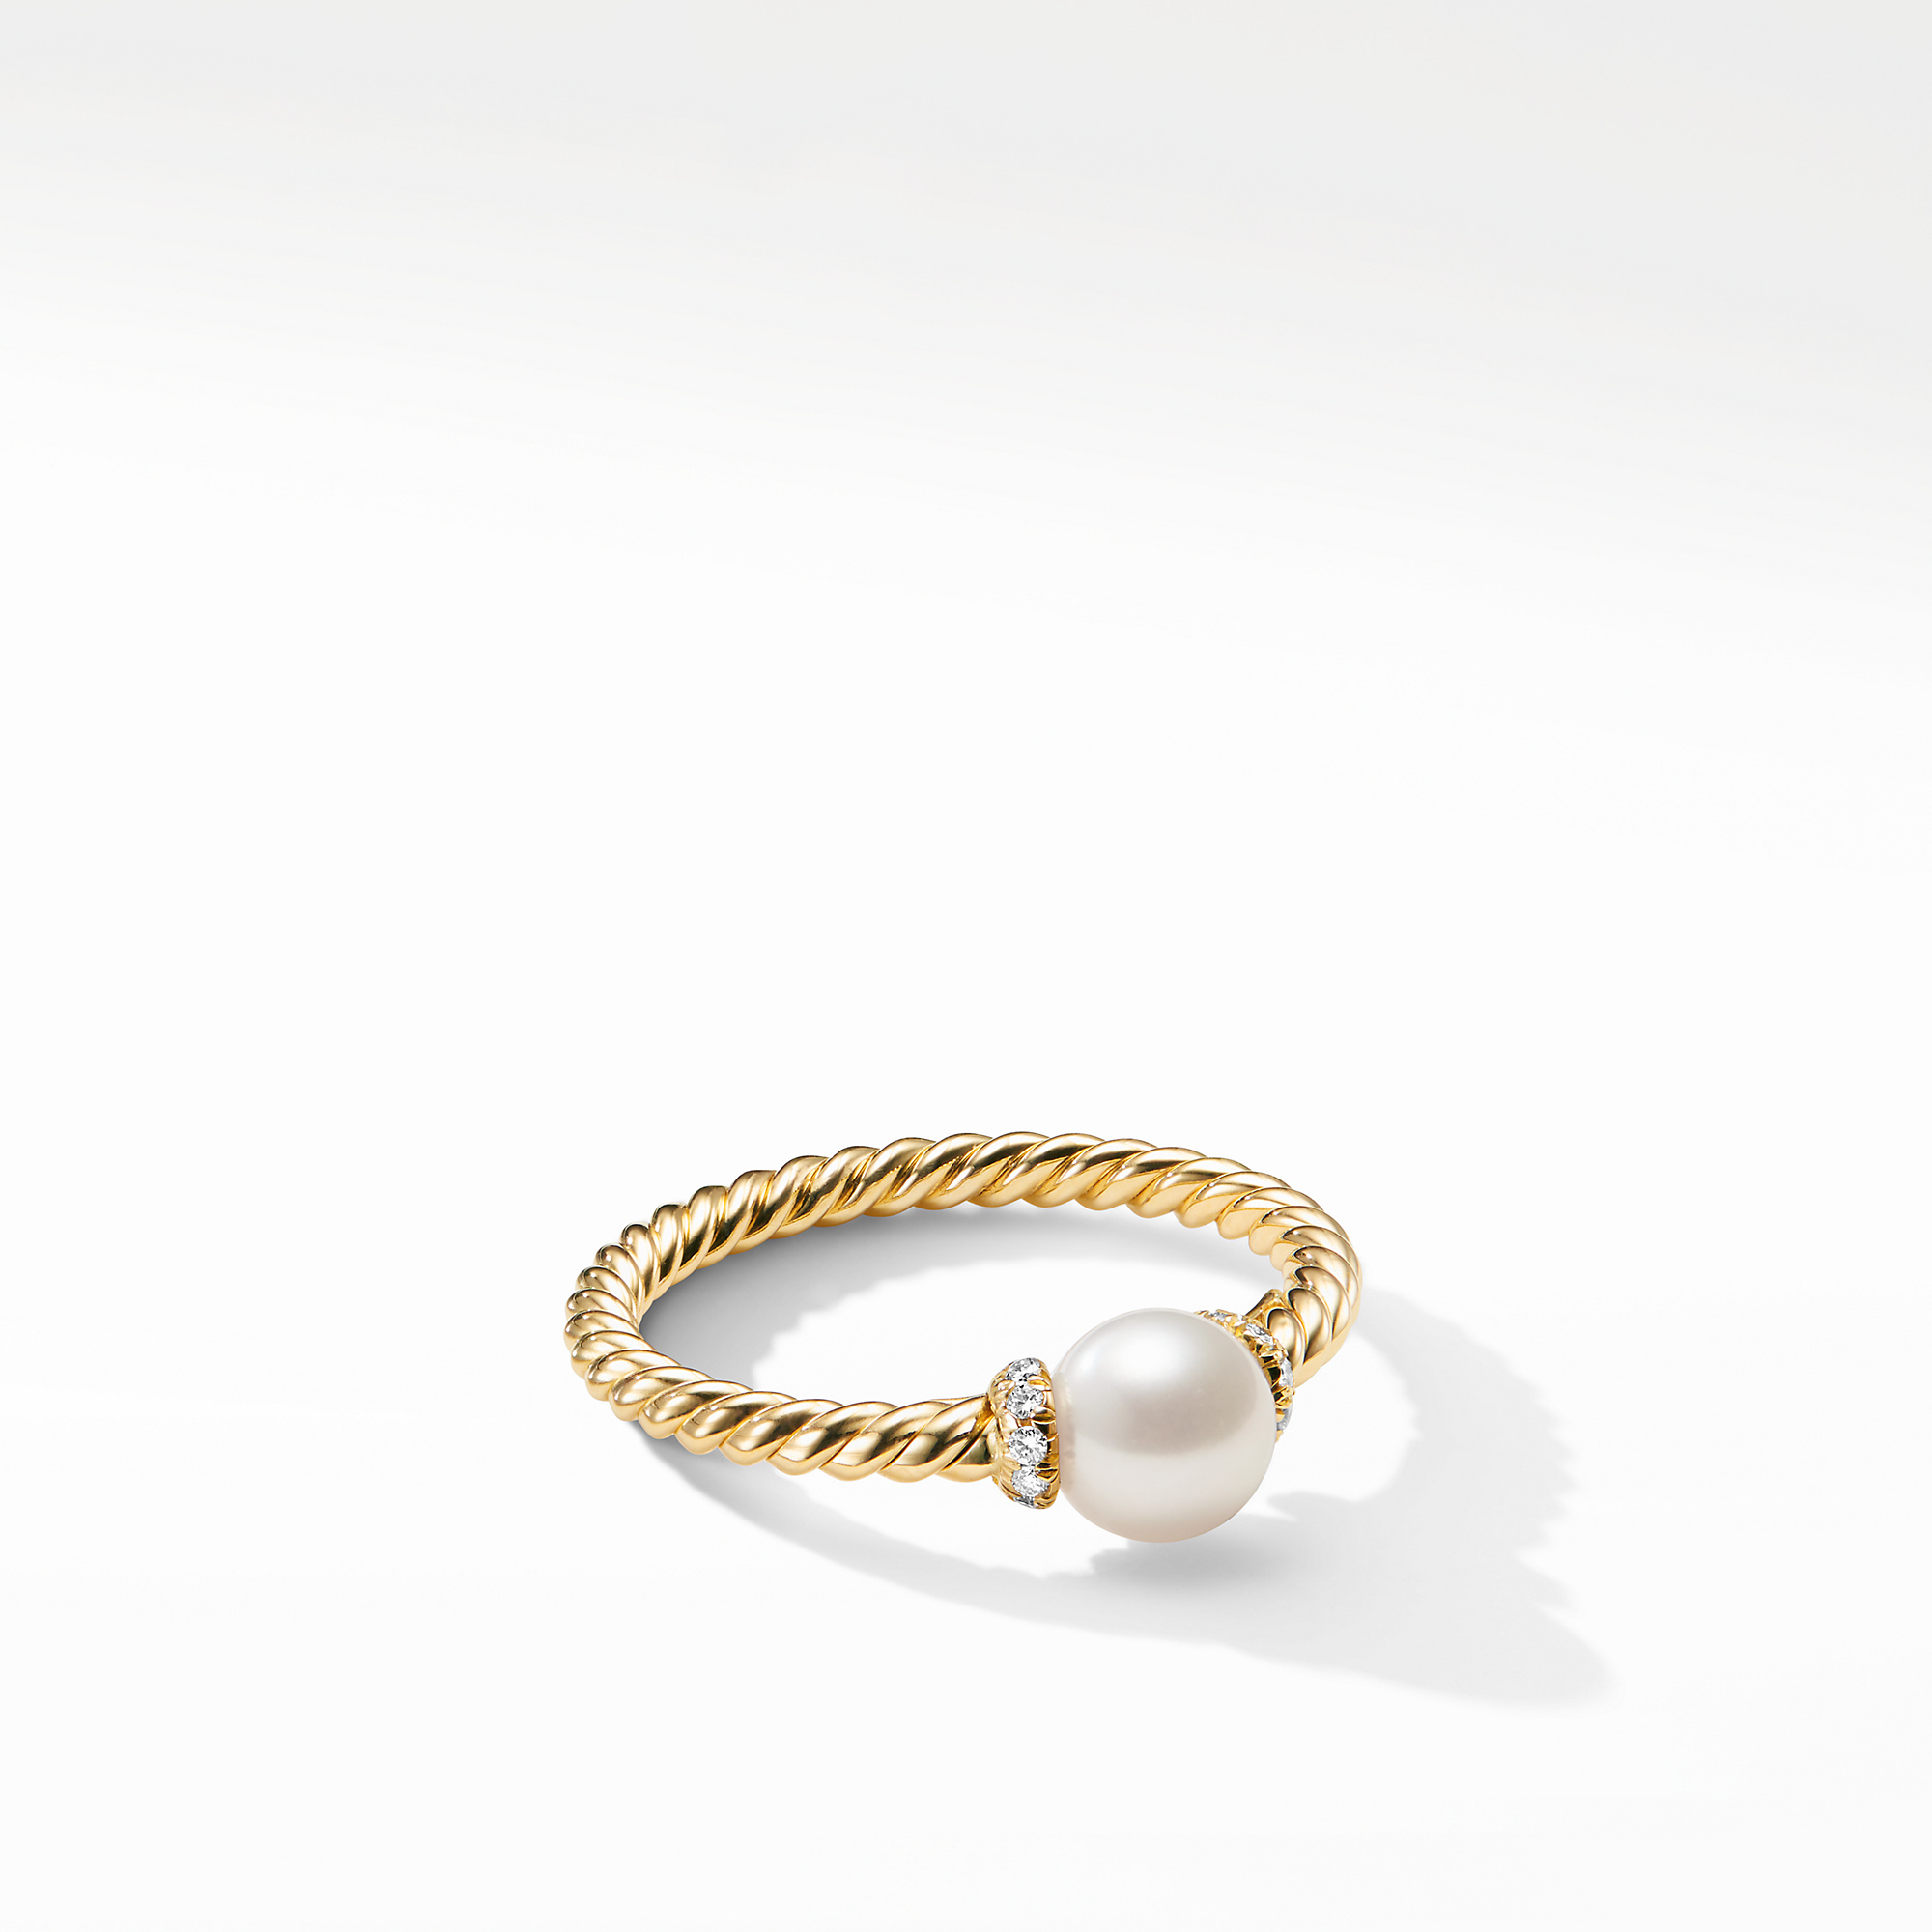 Petite Solari Station Ring in 18K Yellow Gold with Pearl and Diamonds, 2.3mm